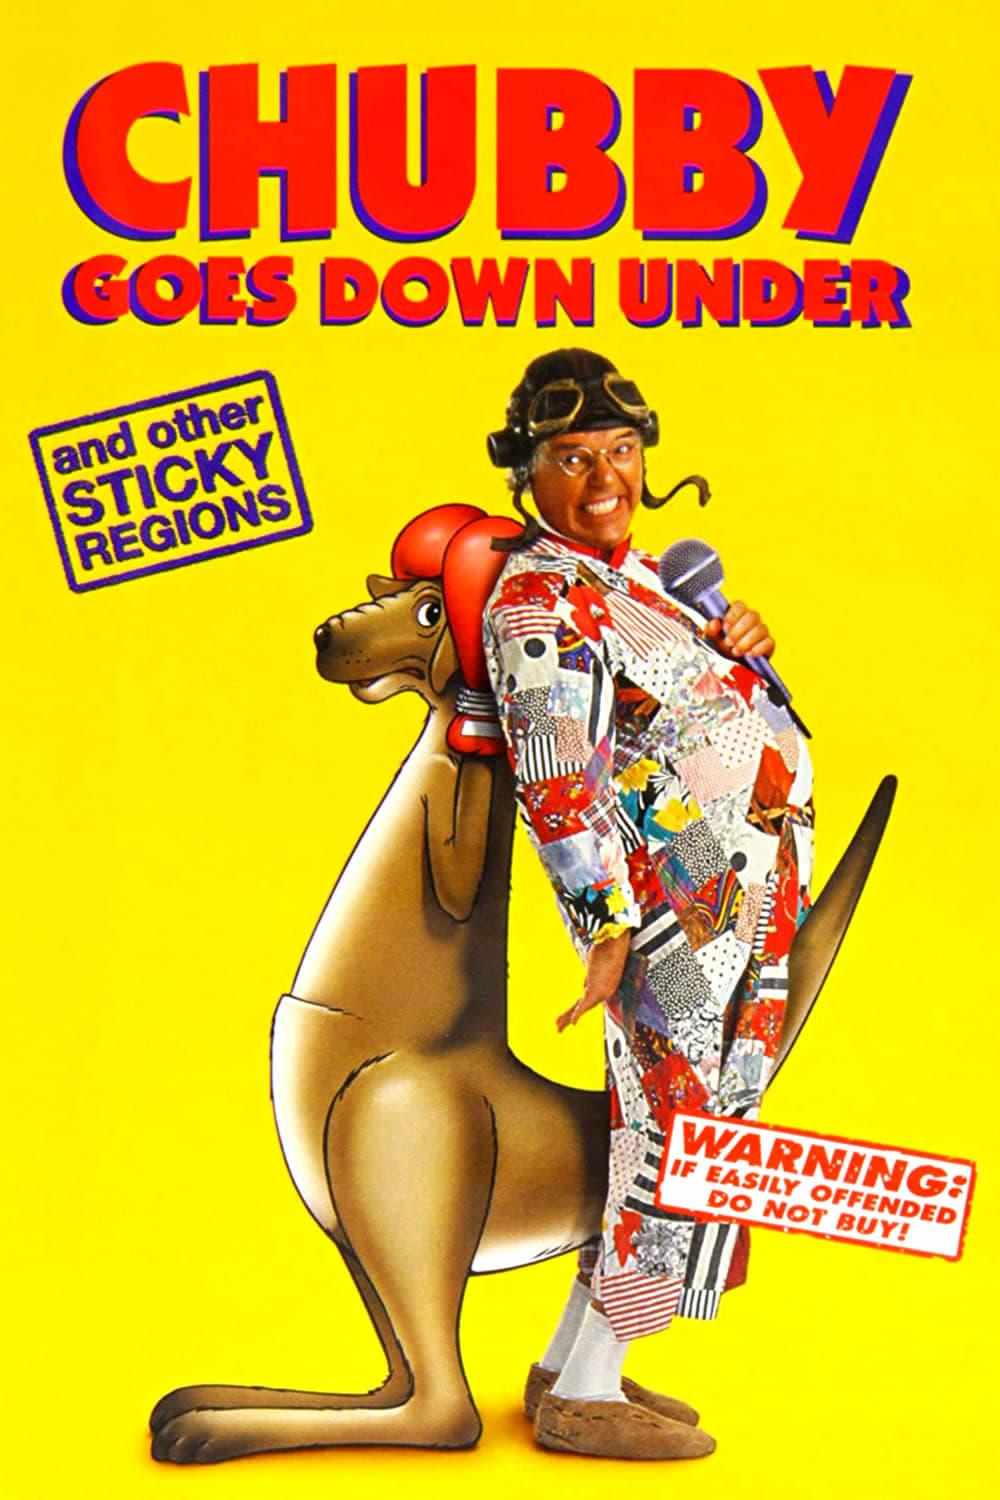 Roy Chubby Brown: Chubby Goes Down Under And Other Sticky Regions poster